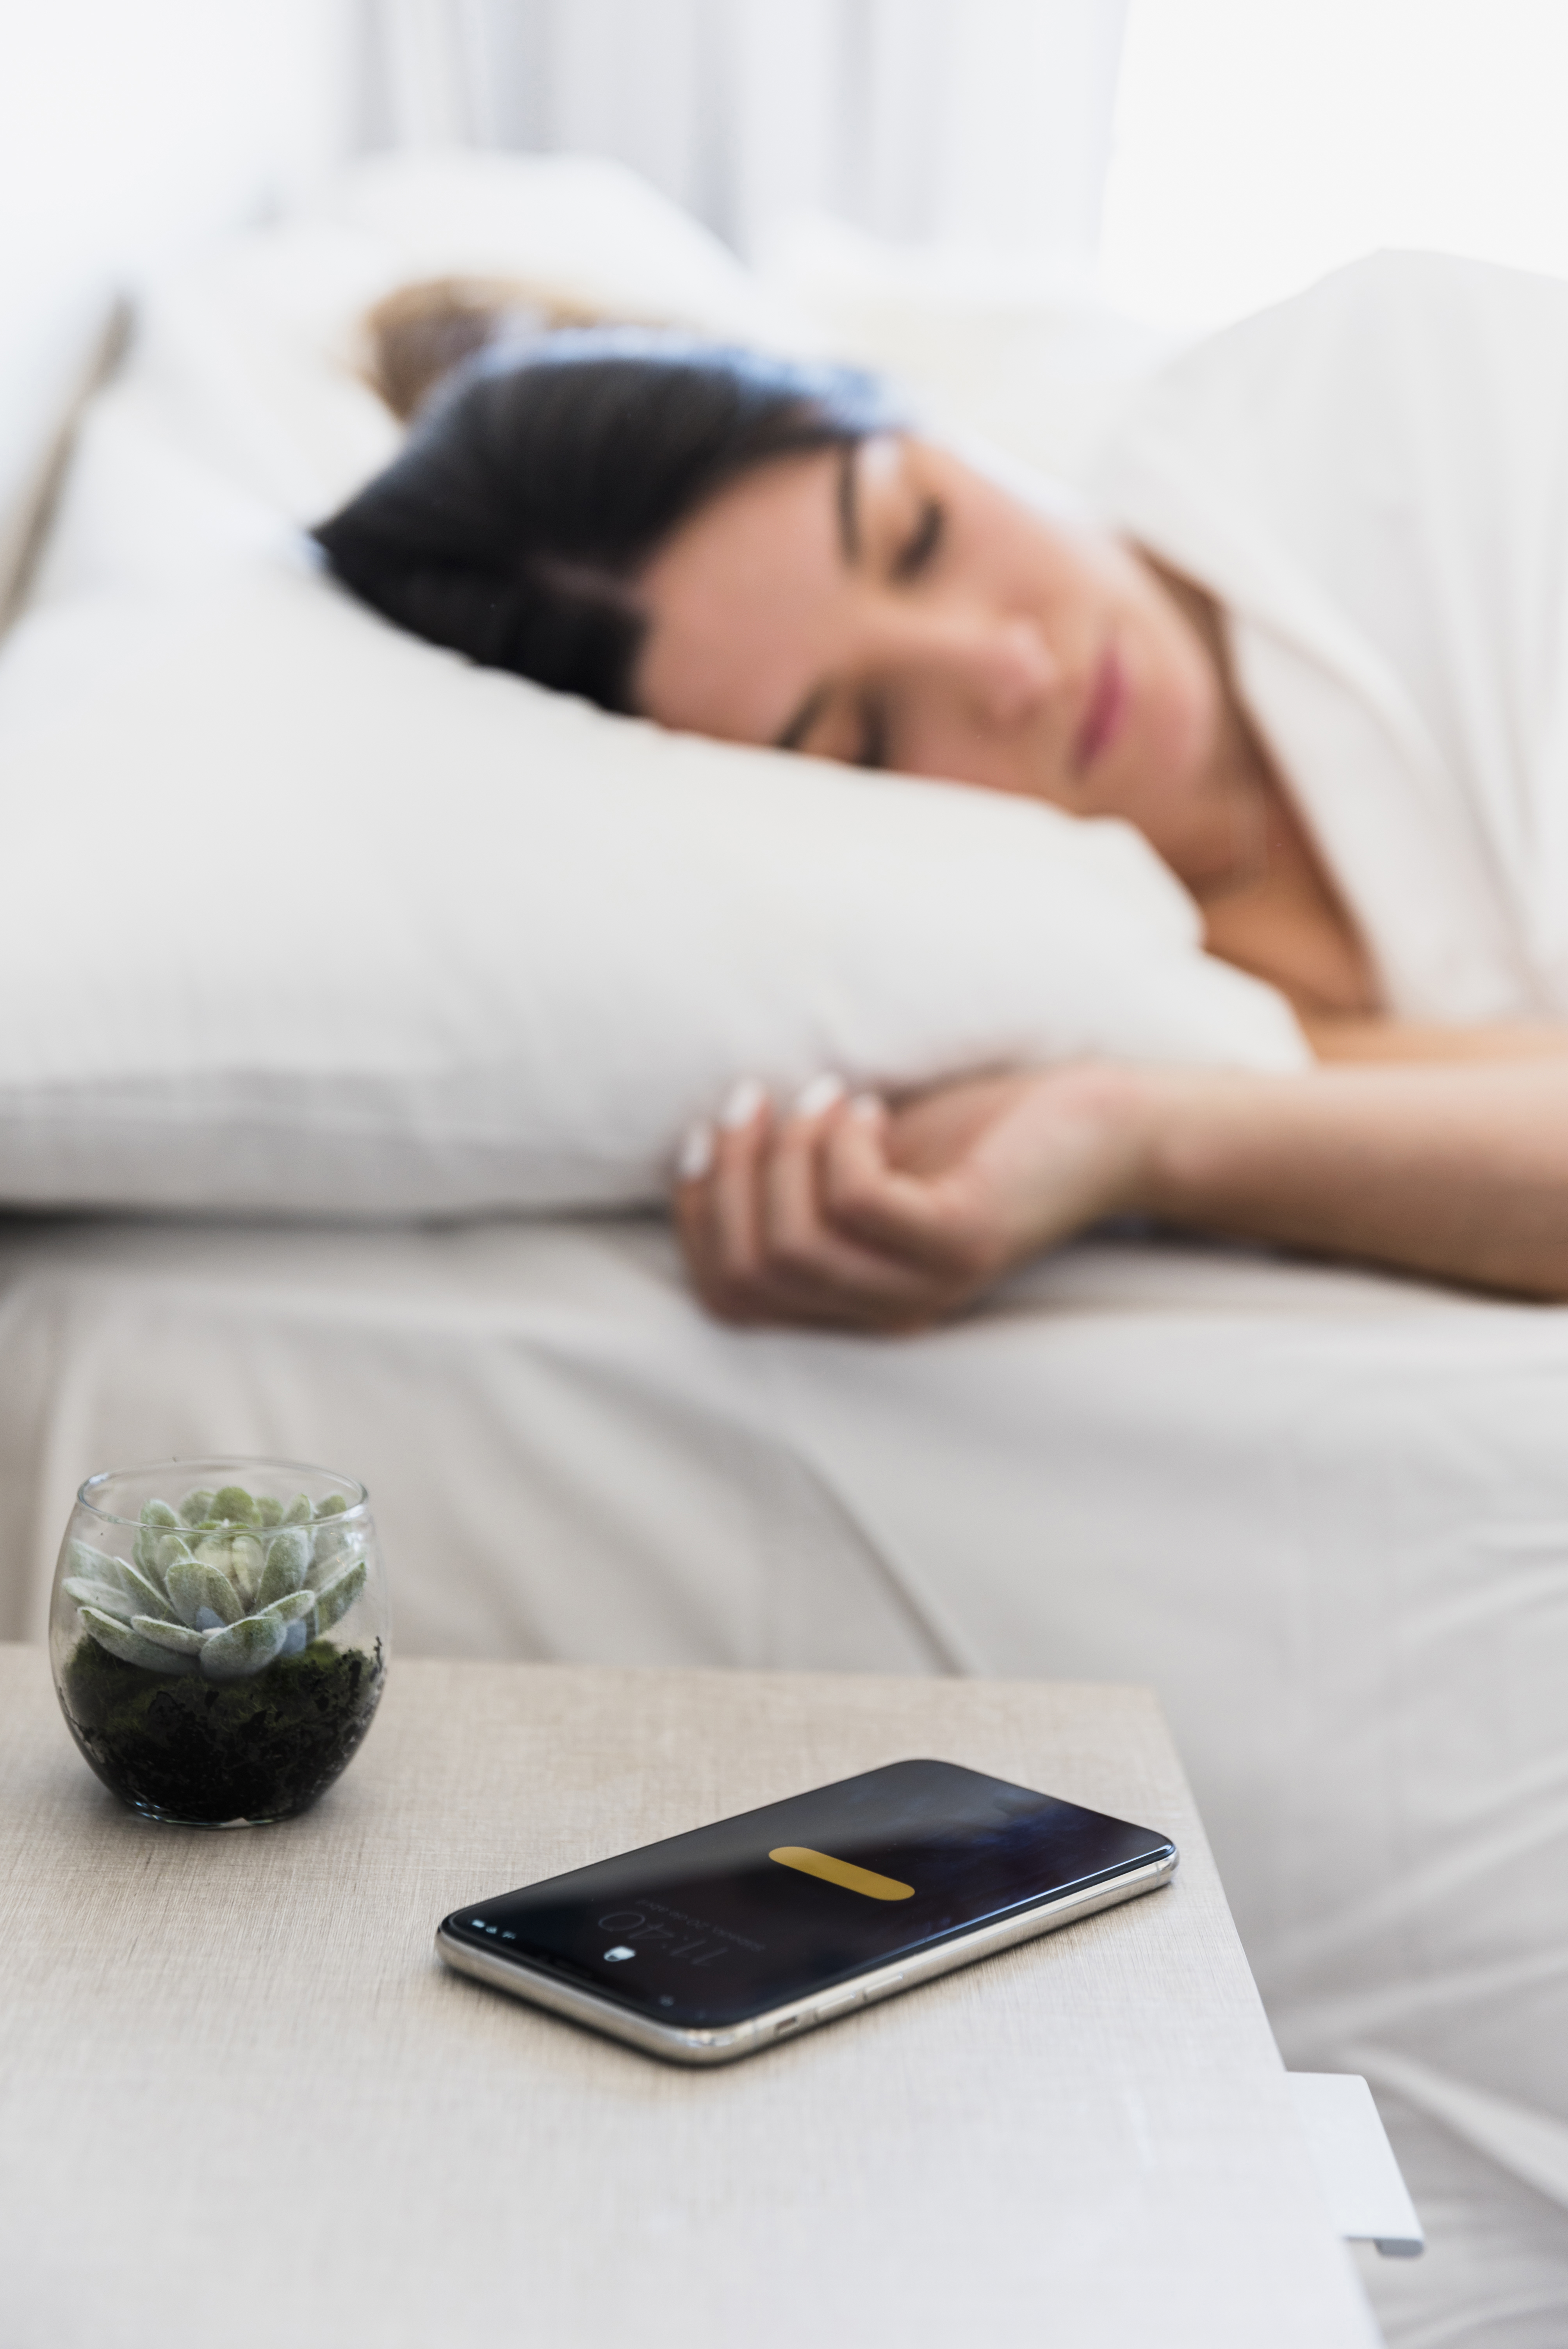 cactus-plant-smartphone-table-near-woman-sleeping-bed